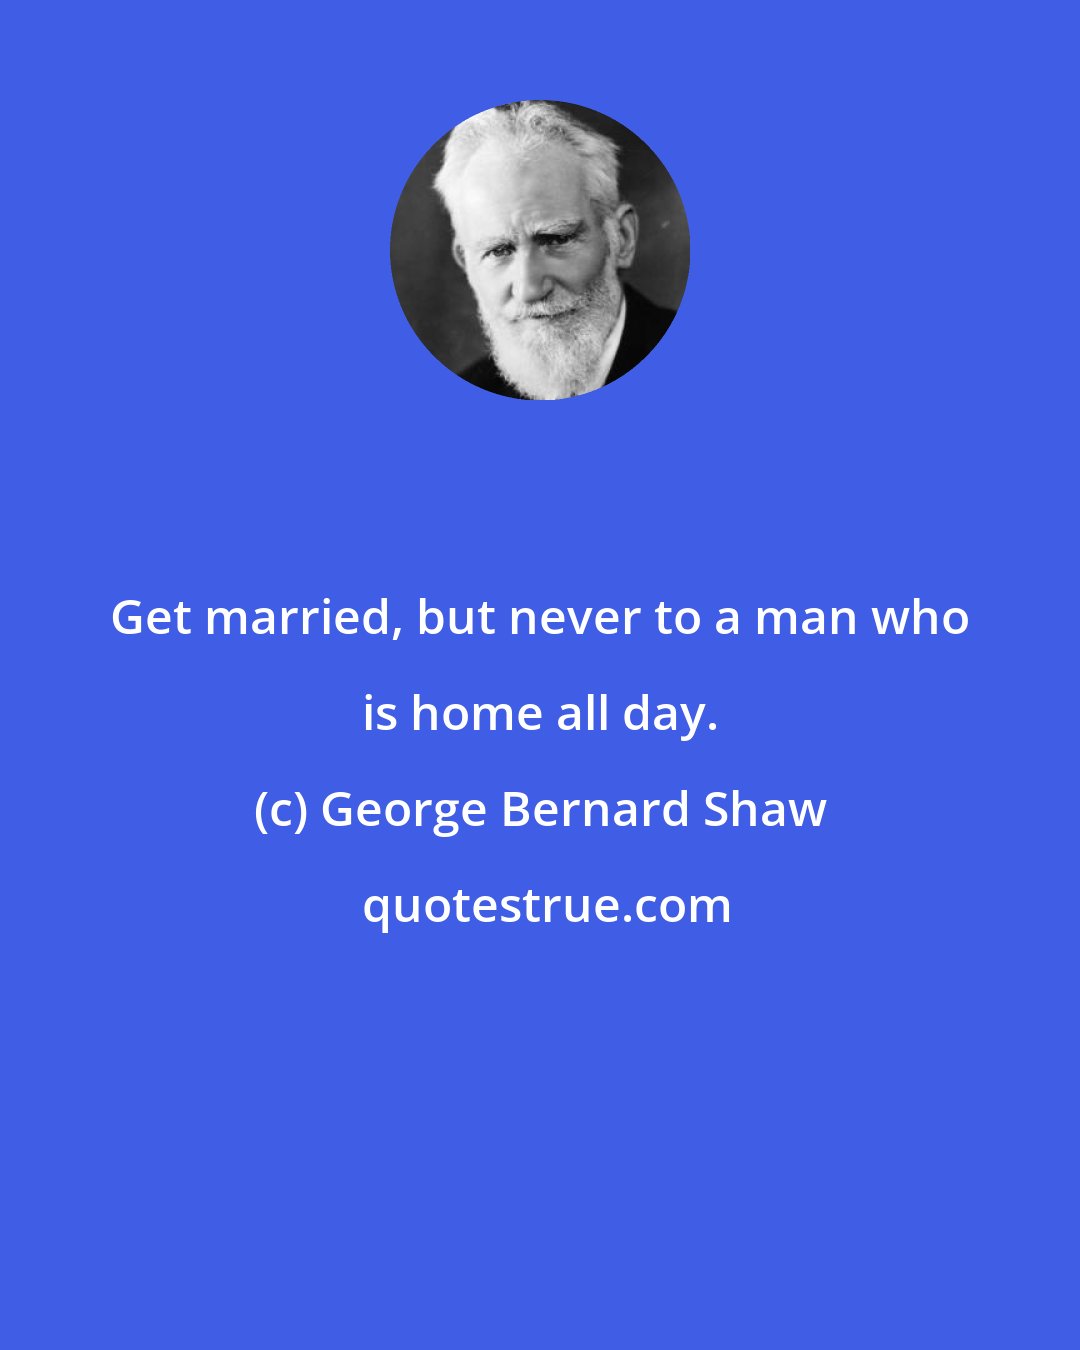 George Bernard Shaw: Get married, but never to a man who is home all day.